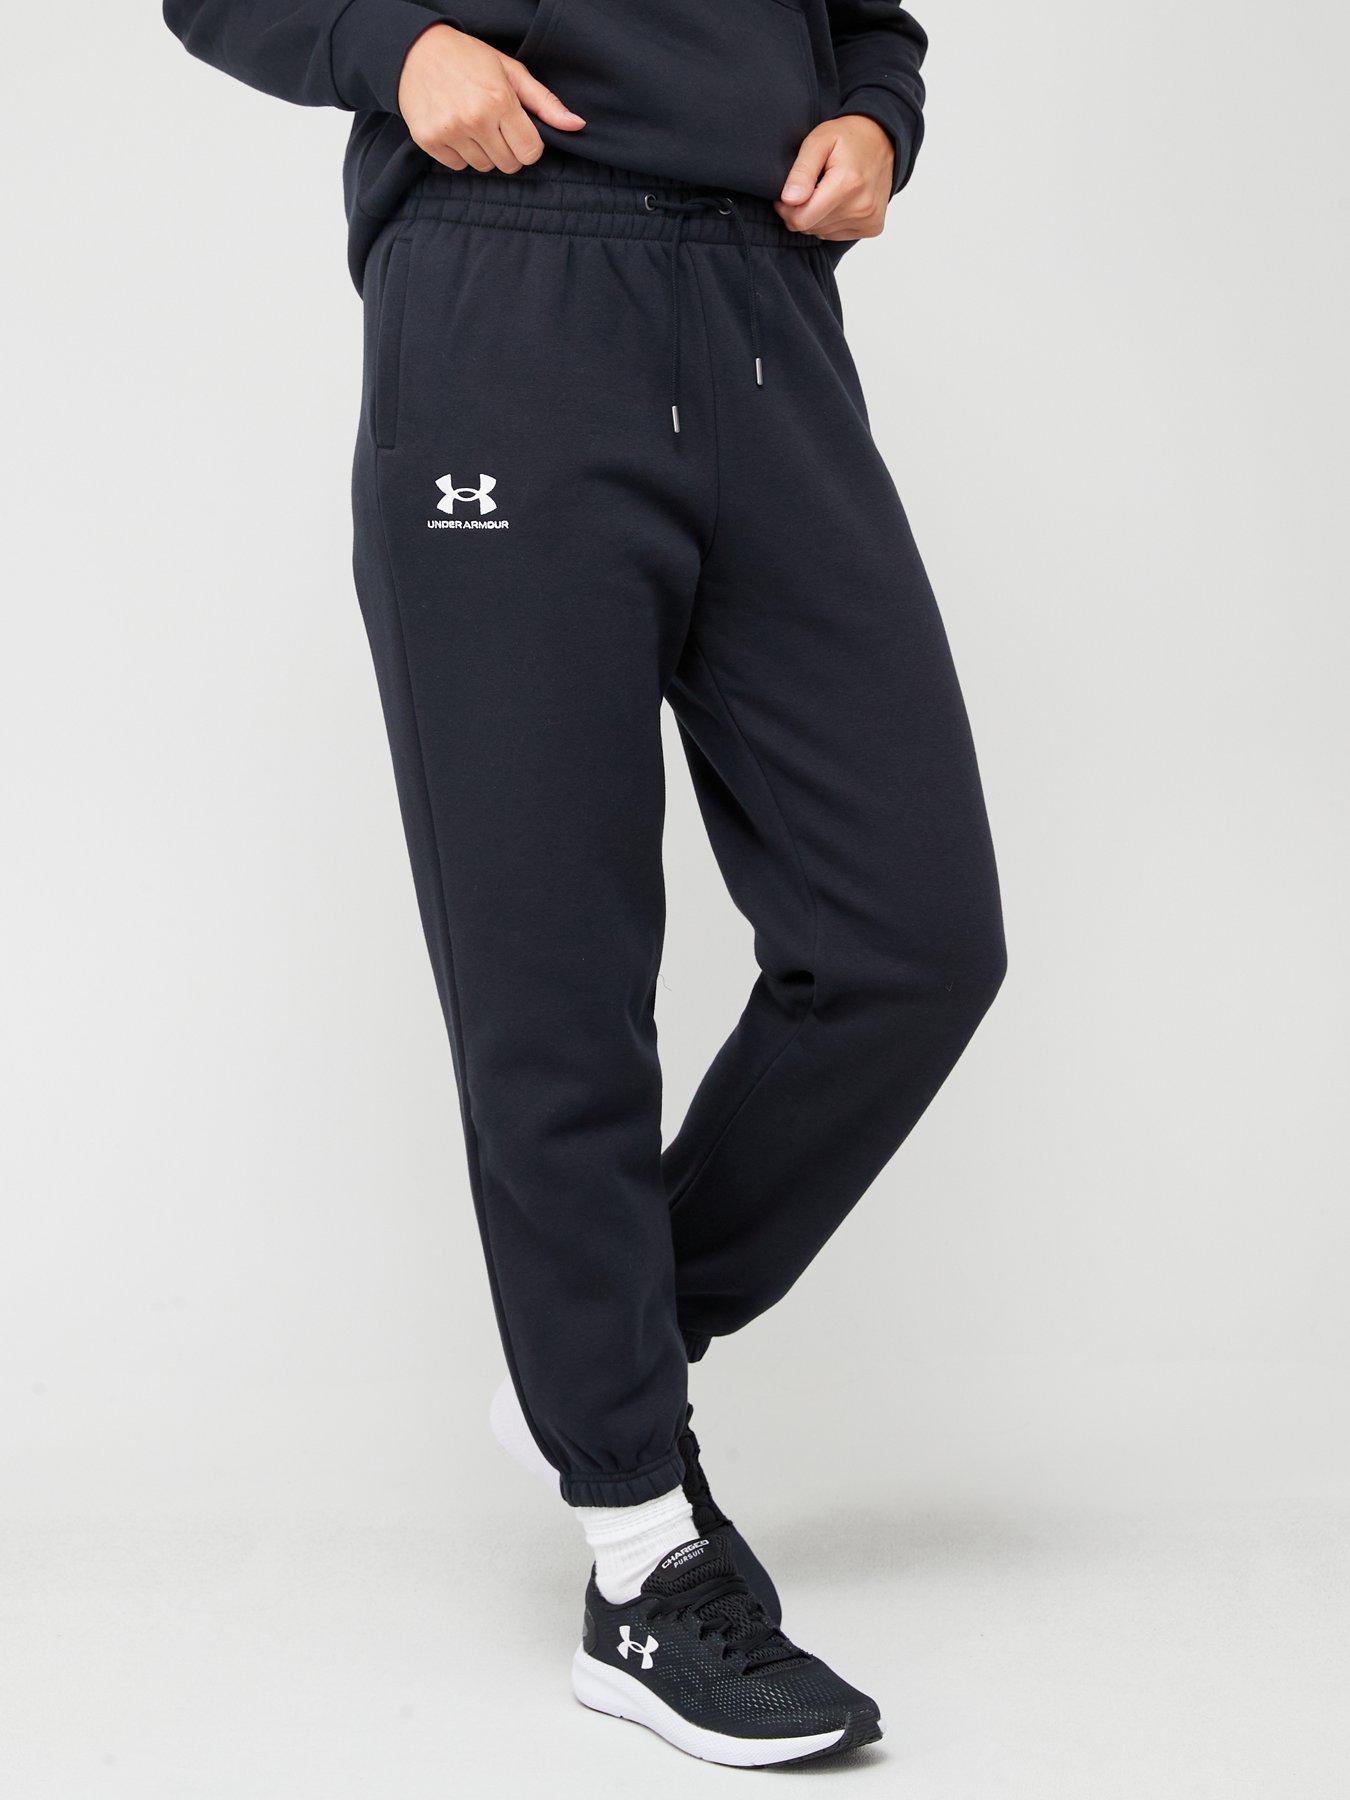 Pre-Owned Under Armour Women's Size M Active Pants 